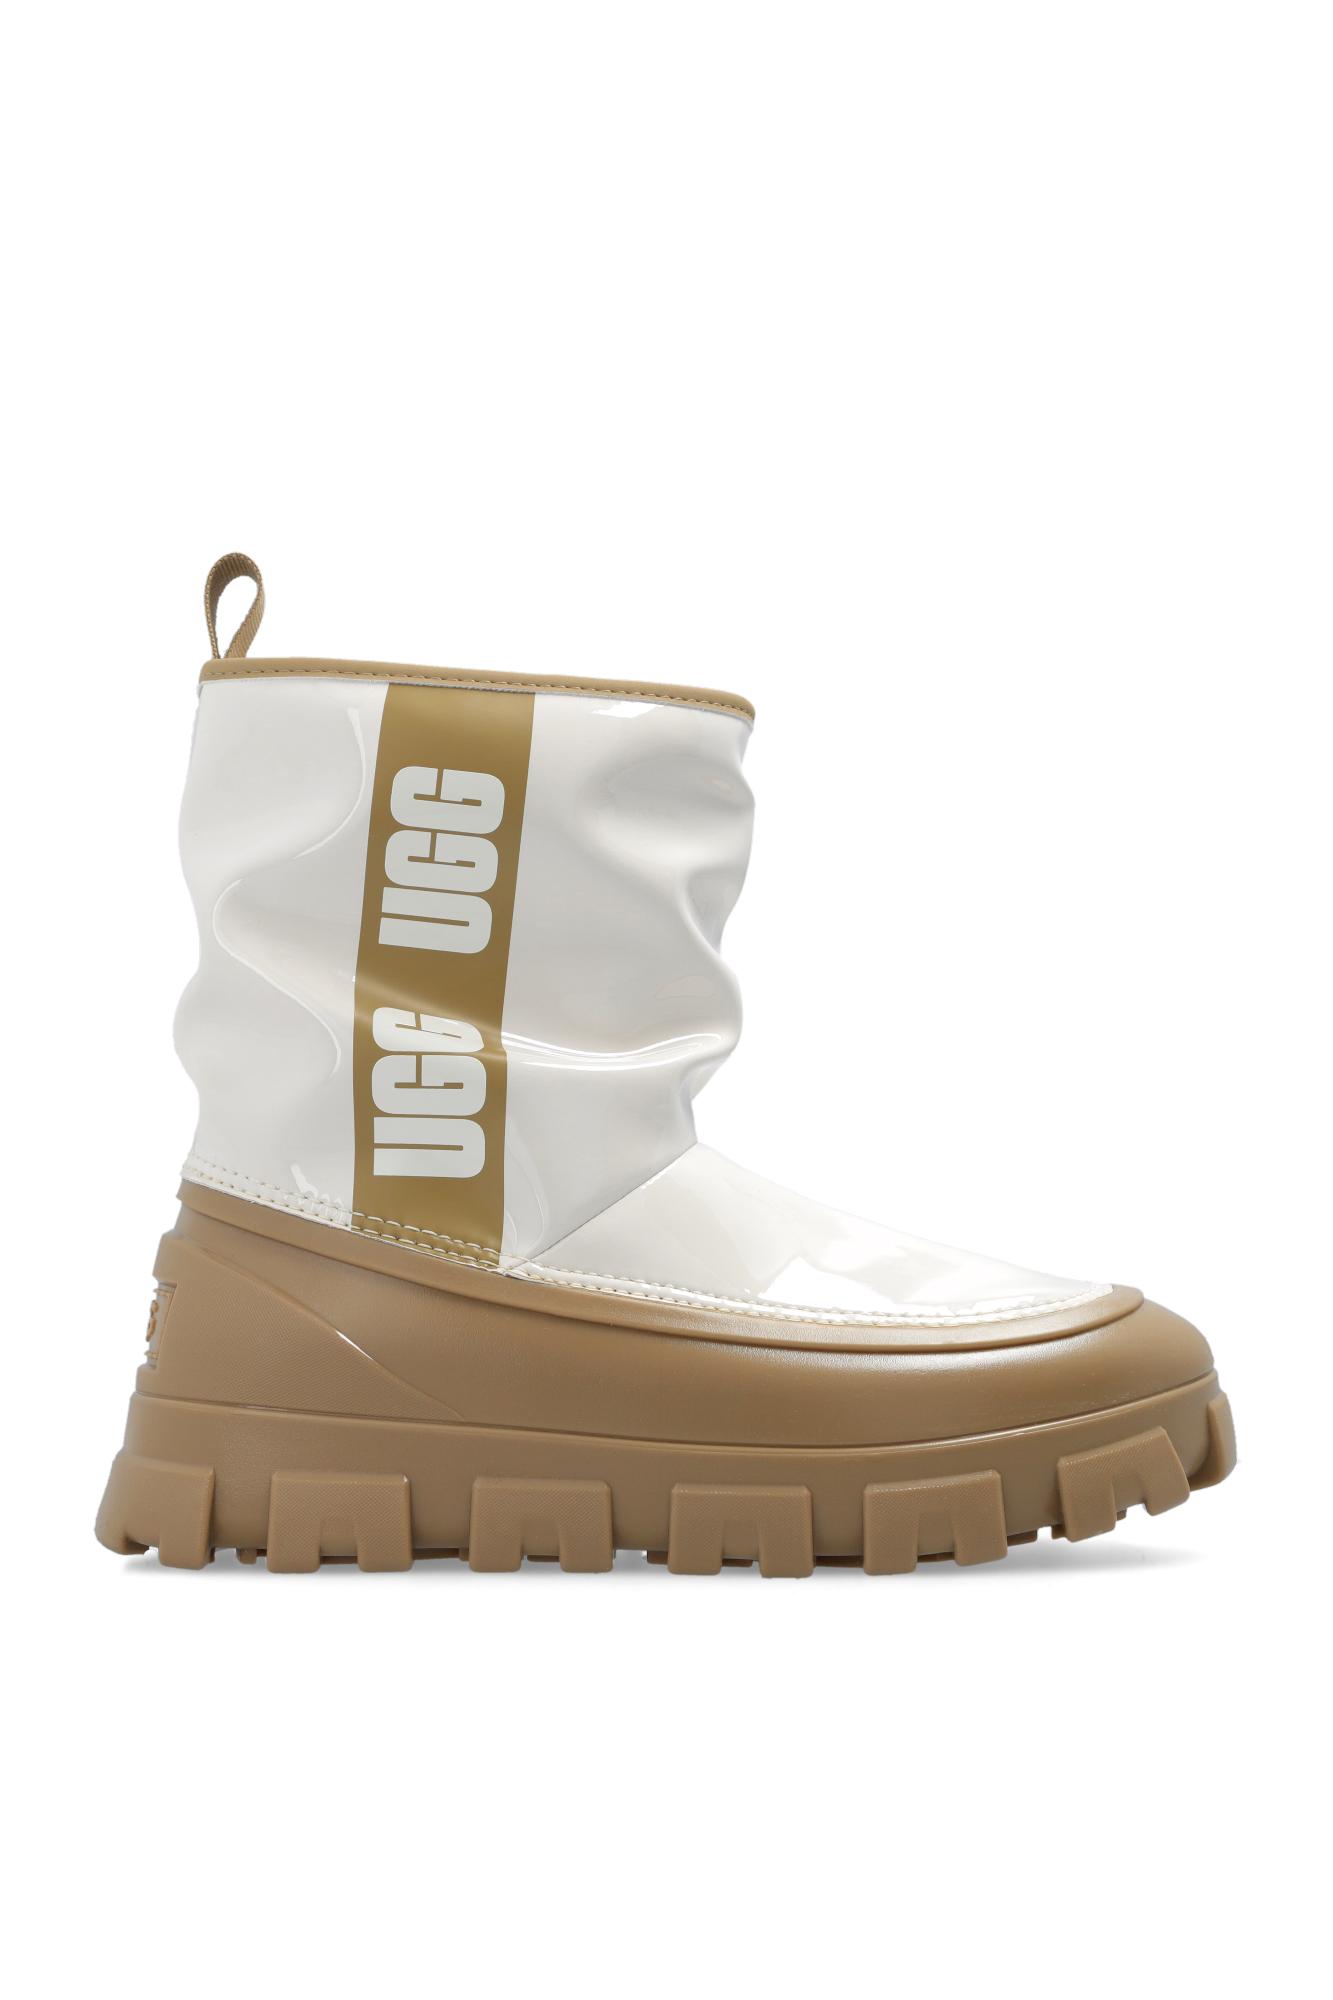 UGG 'brellah Mini' Ankle Snow Boots in White | Lyst UK